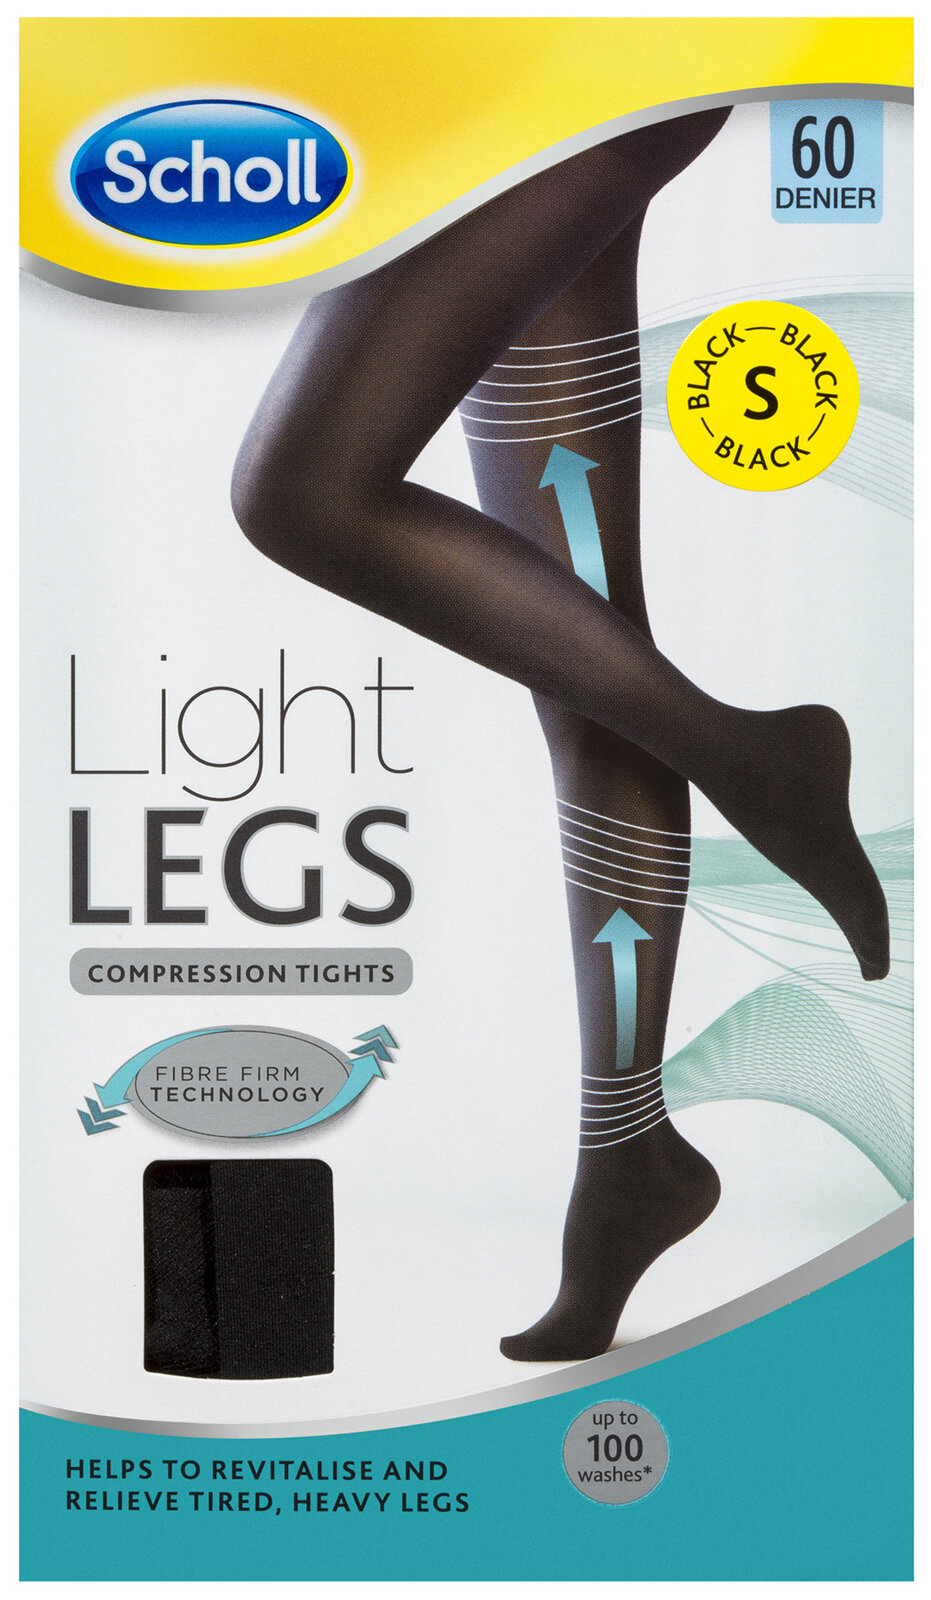 Scholl Light Legs Compression Tights 60 Denier for Tired Legs Black Small -  RB